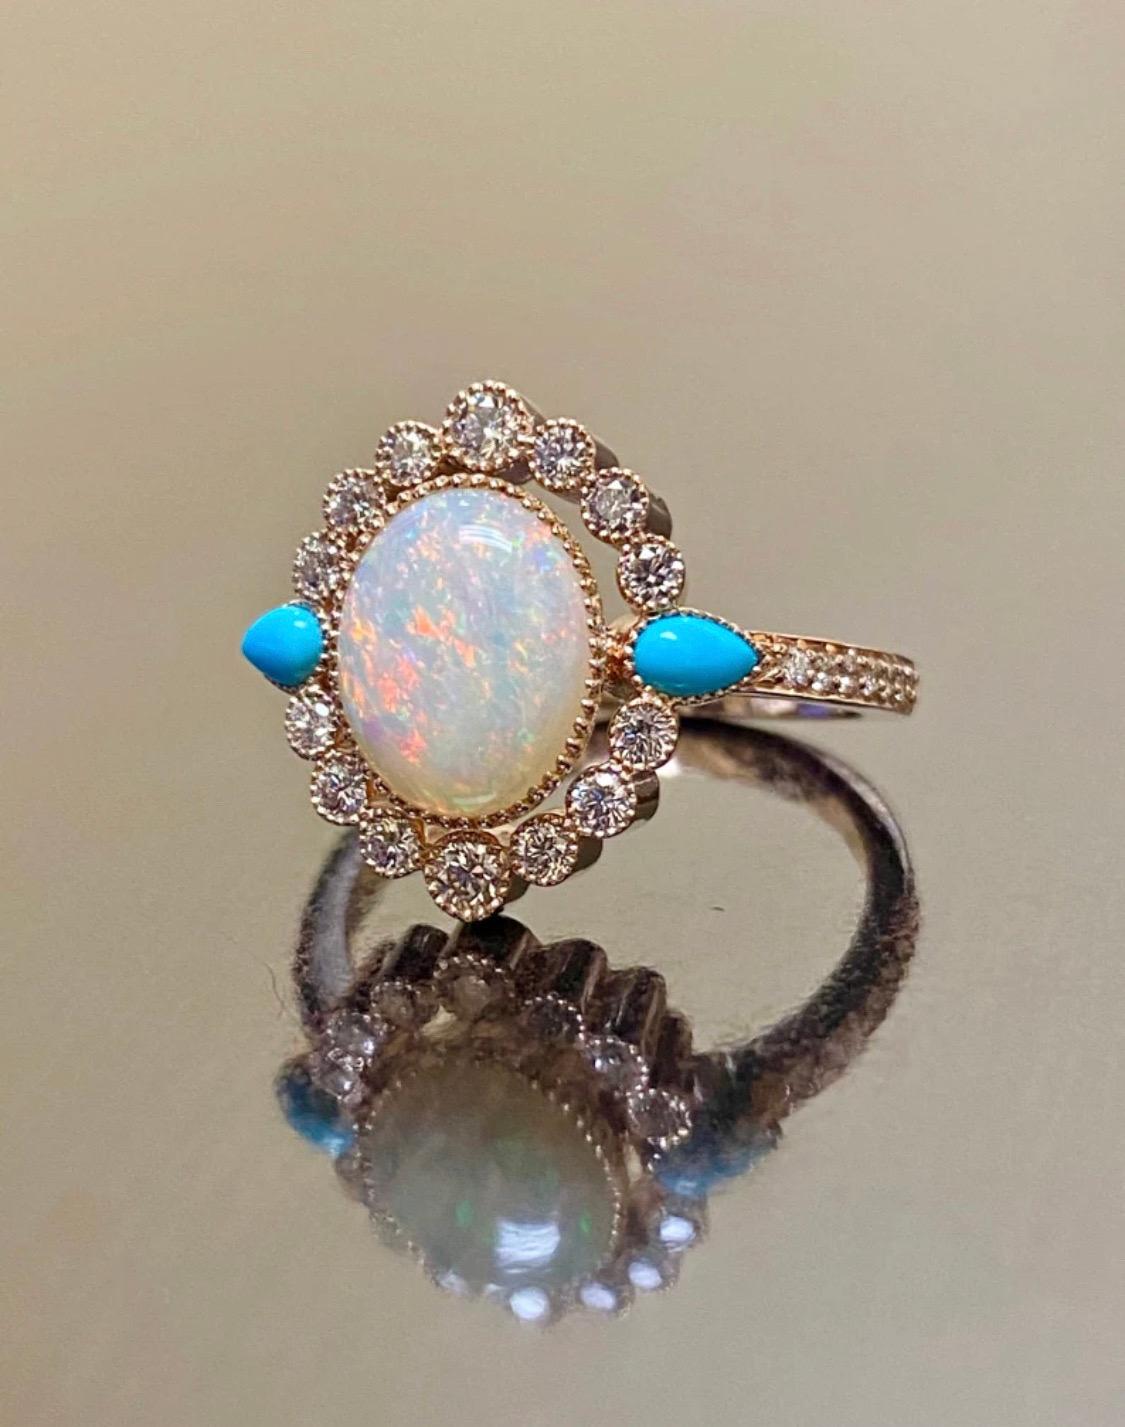 DeKara Designs Collection

Metal- 18K Rose Gold, .750.

Stones- Center Features an Oval Fiery Australian Opal 10 x 8 MM, Two Pear Shaped Sleeping Beauty Turquoise, 10 Round Sleeping Beauty Turquoise, 30 Round Diamonds F-G Color VS1 Clarity, 0.70